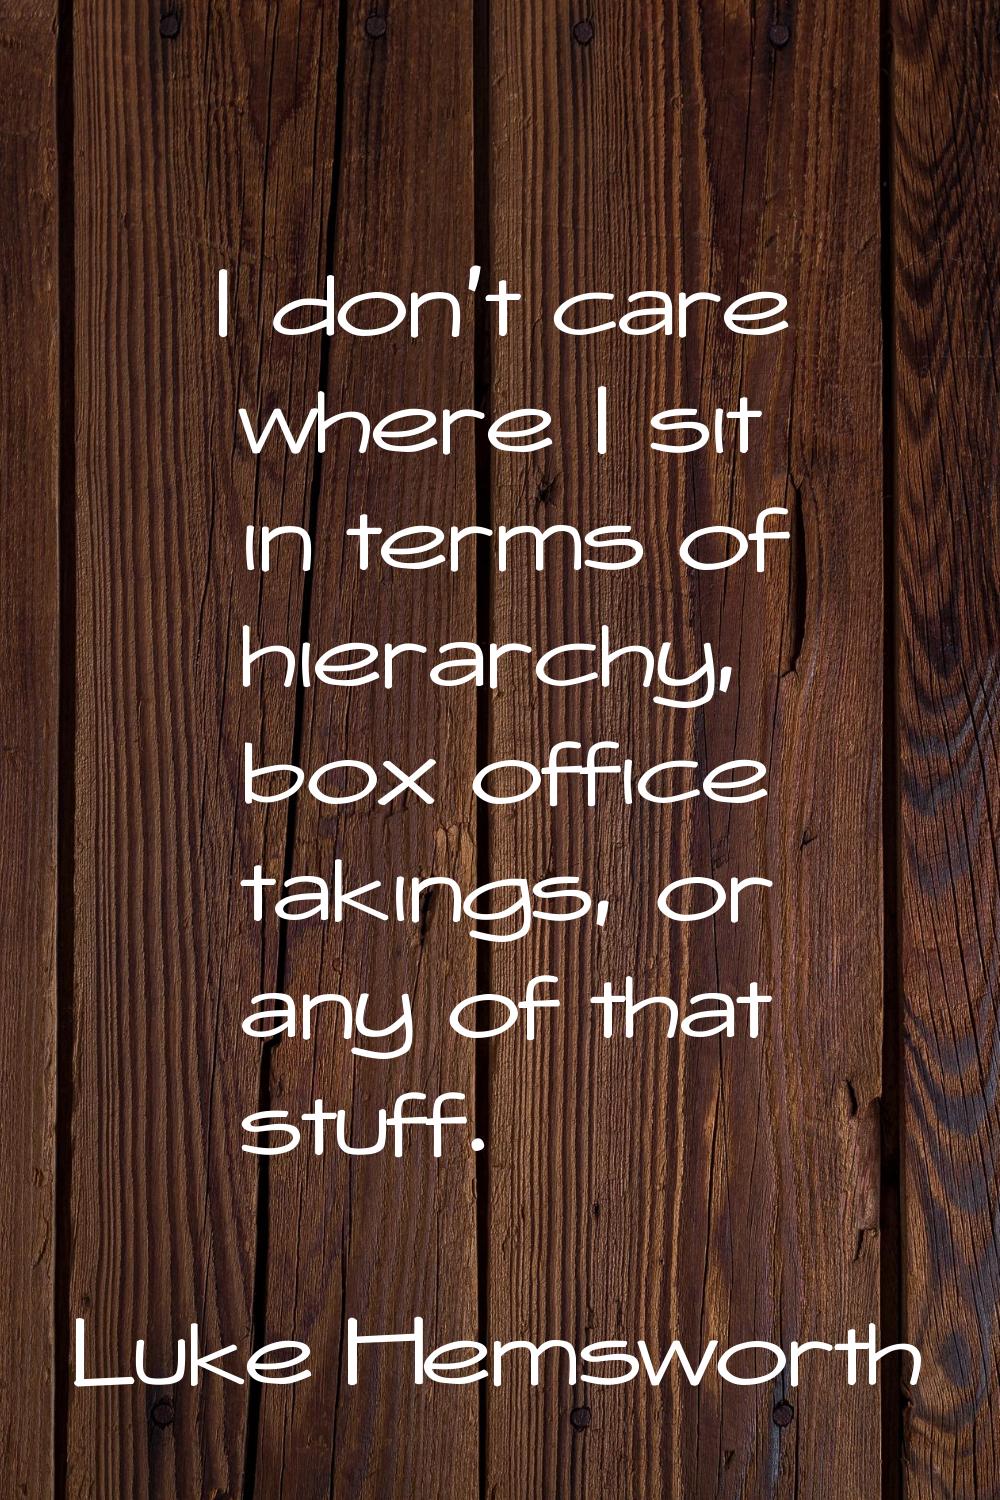 I don't care where I sit in terms of hierarchy, box office takings, or any of that stuff.